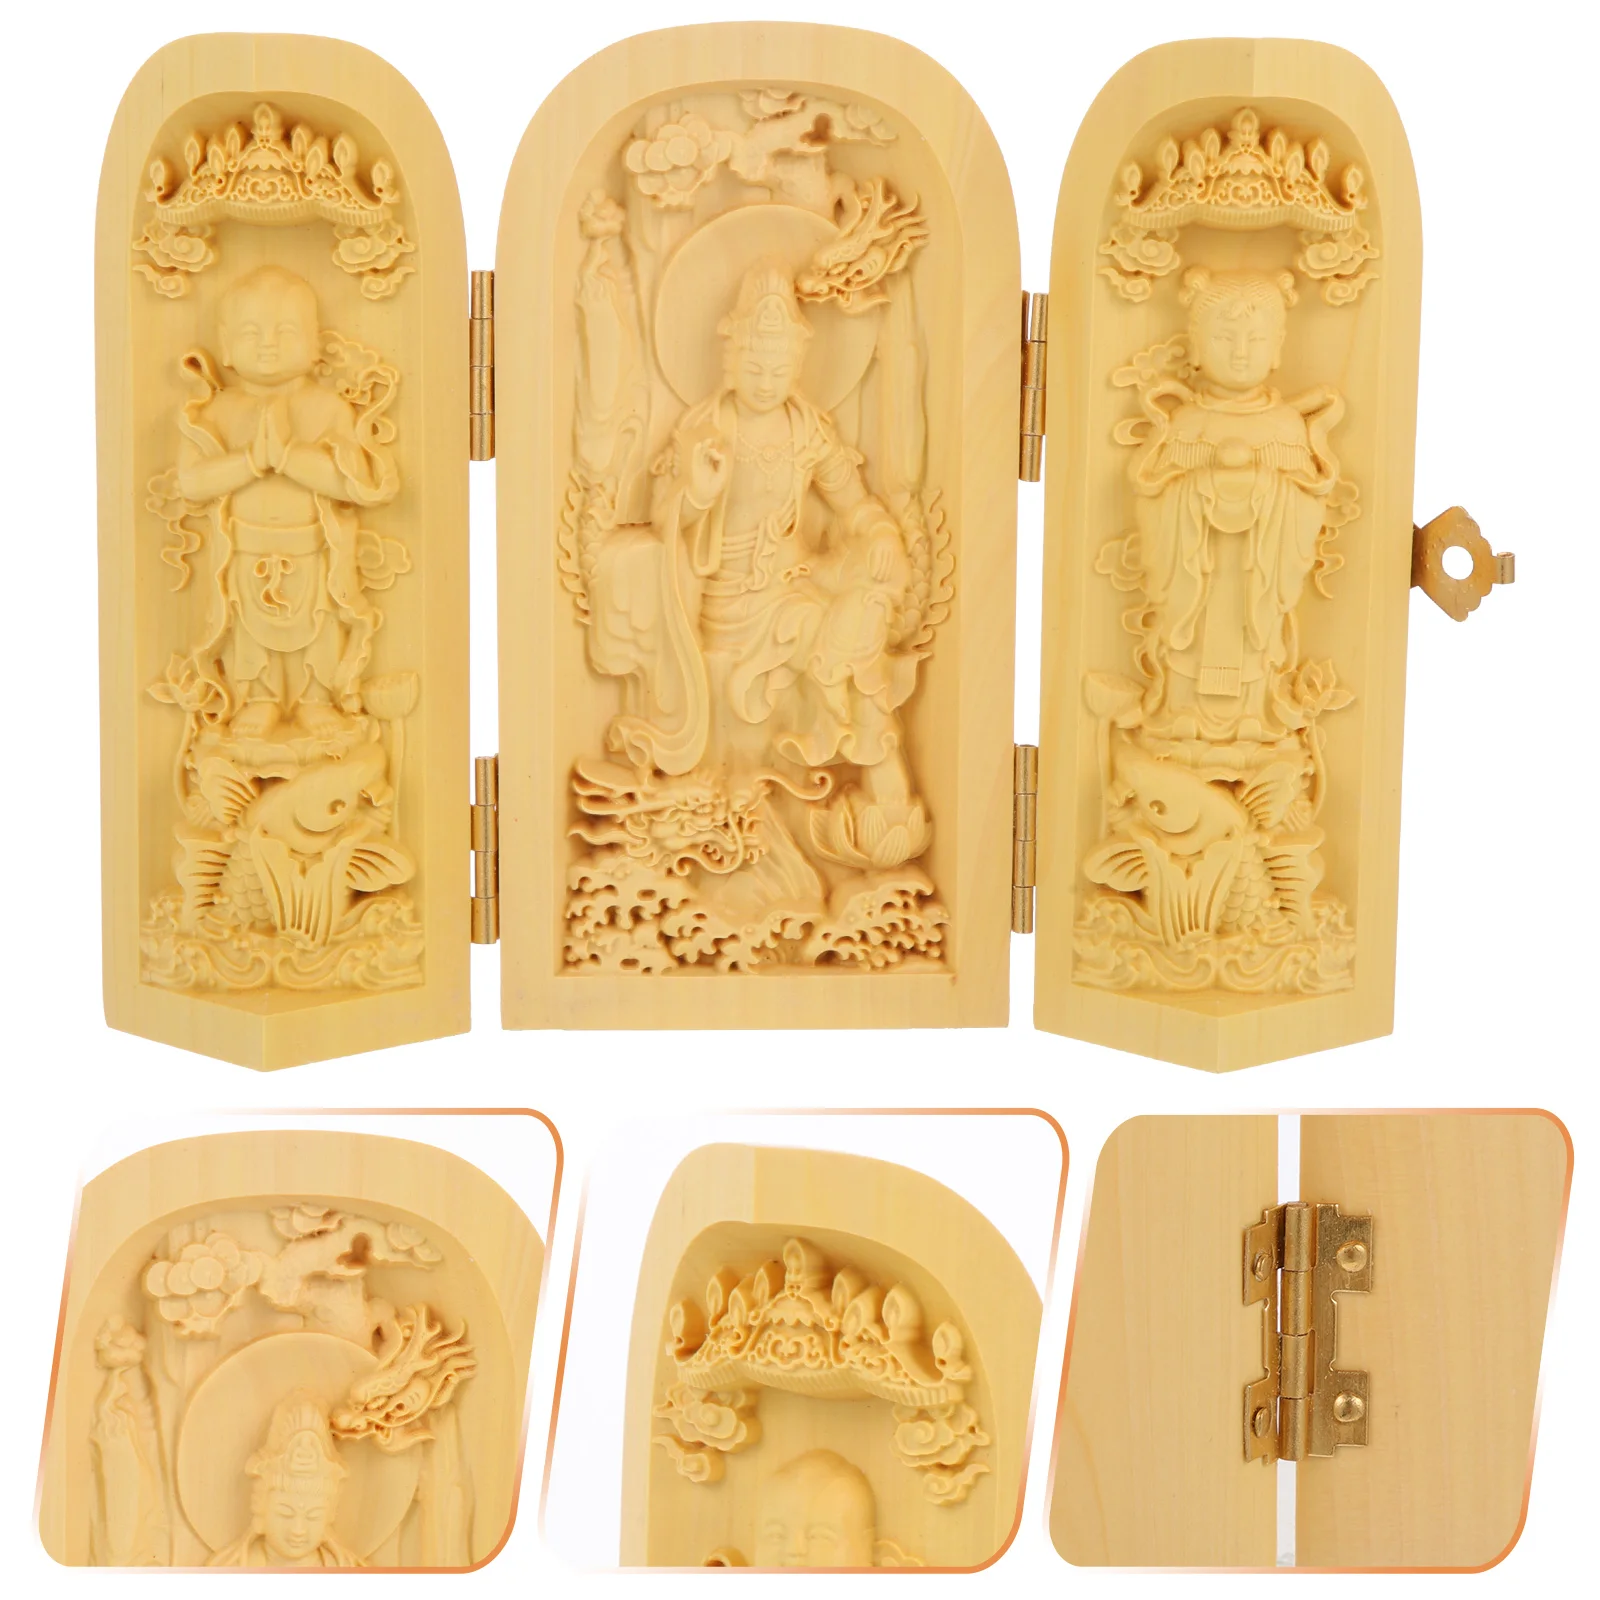 

Statues Wooden Box Guanyin Figurines Statue Carving Sculpture Open Boxwood Buddism Godness Ornament Wood Crafts Figurine